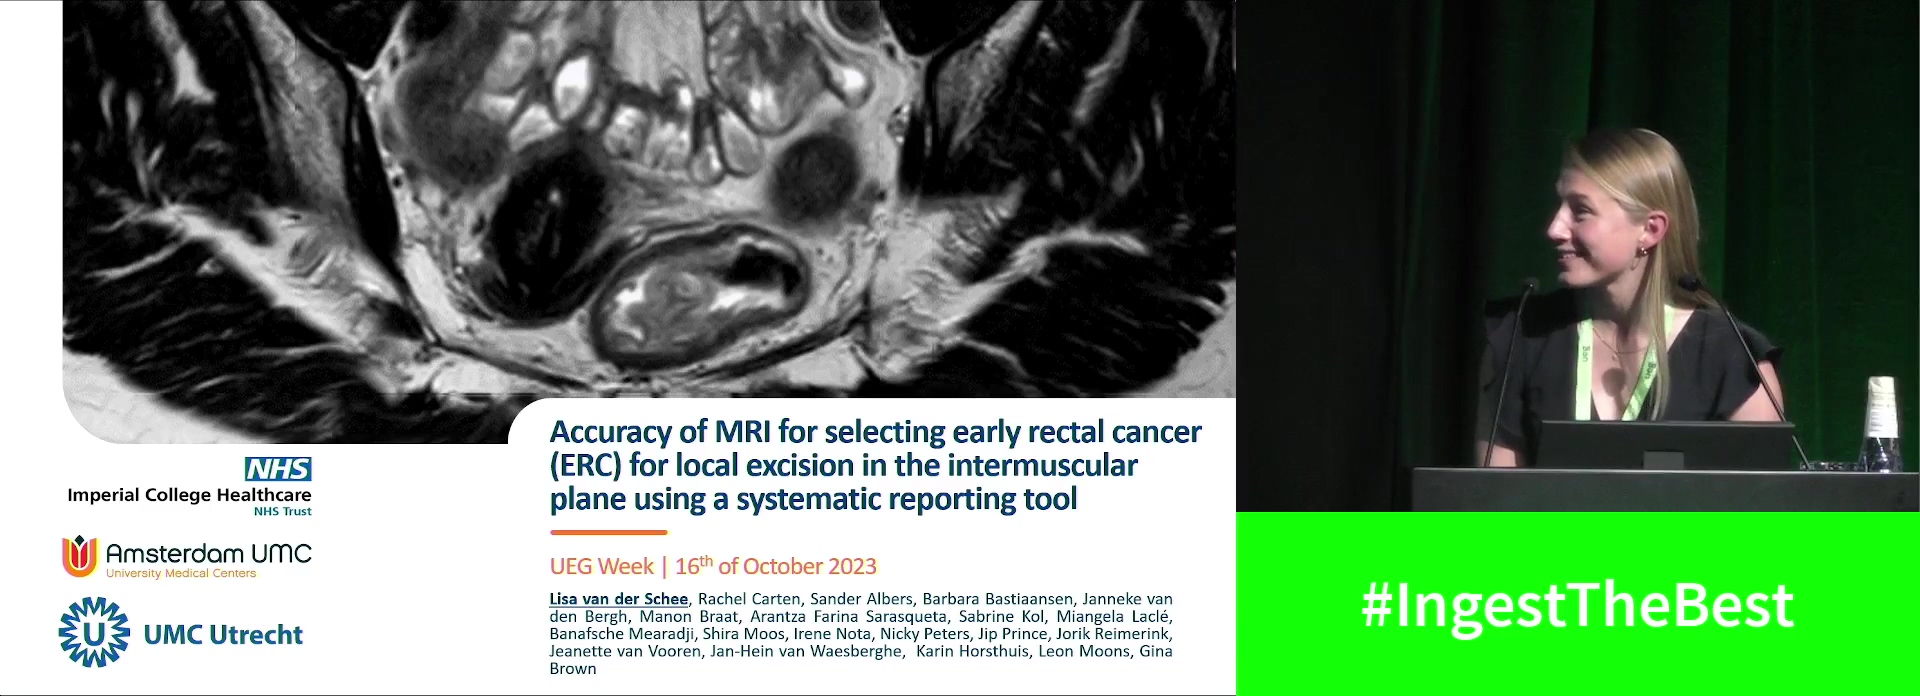 ACCURACY OF MRI FOR SELECTING EARLY RECTAL CANCER (ERC) FOR LOCAL EXCISION IN THE INTERMUSCULAR PLANE USING A SYSTEMATIC REPORTING TOOL